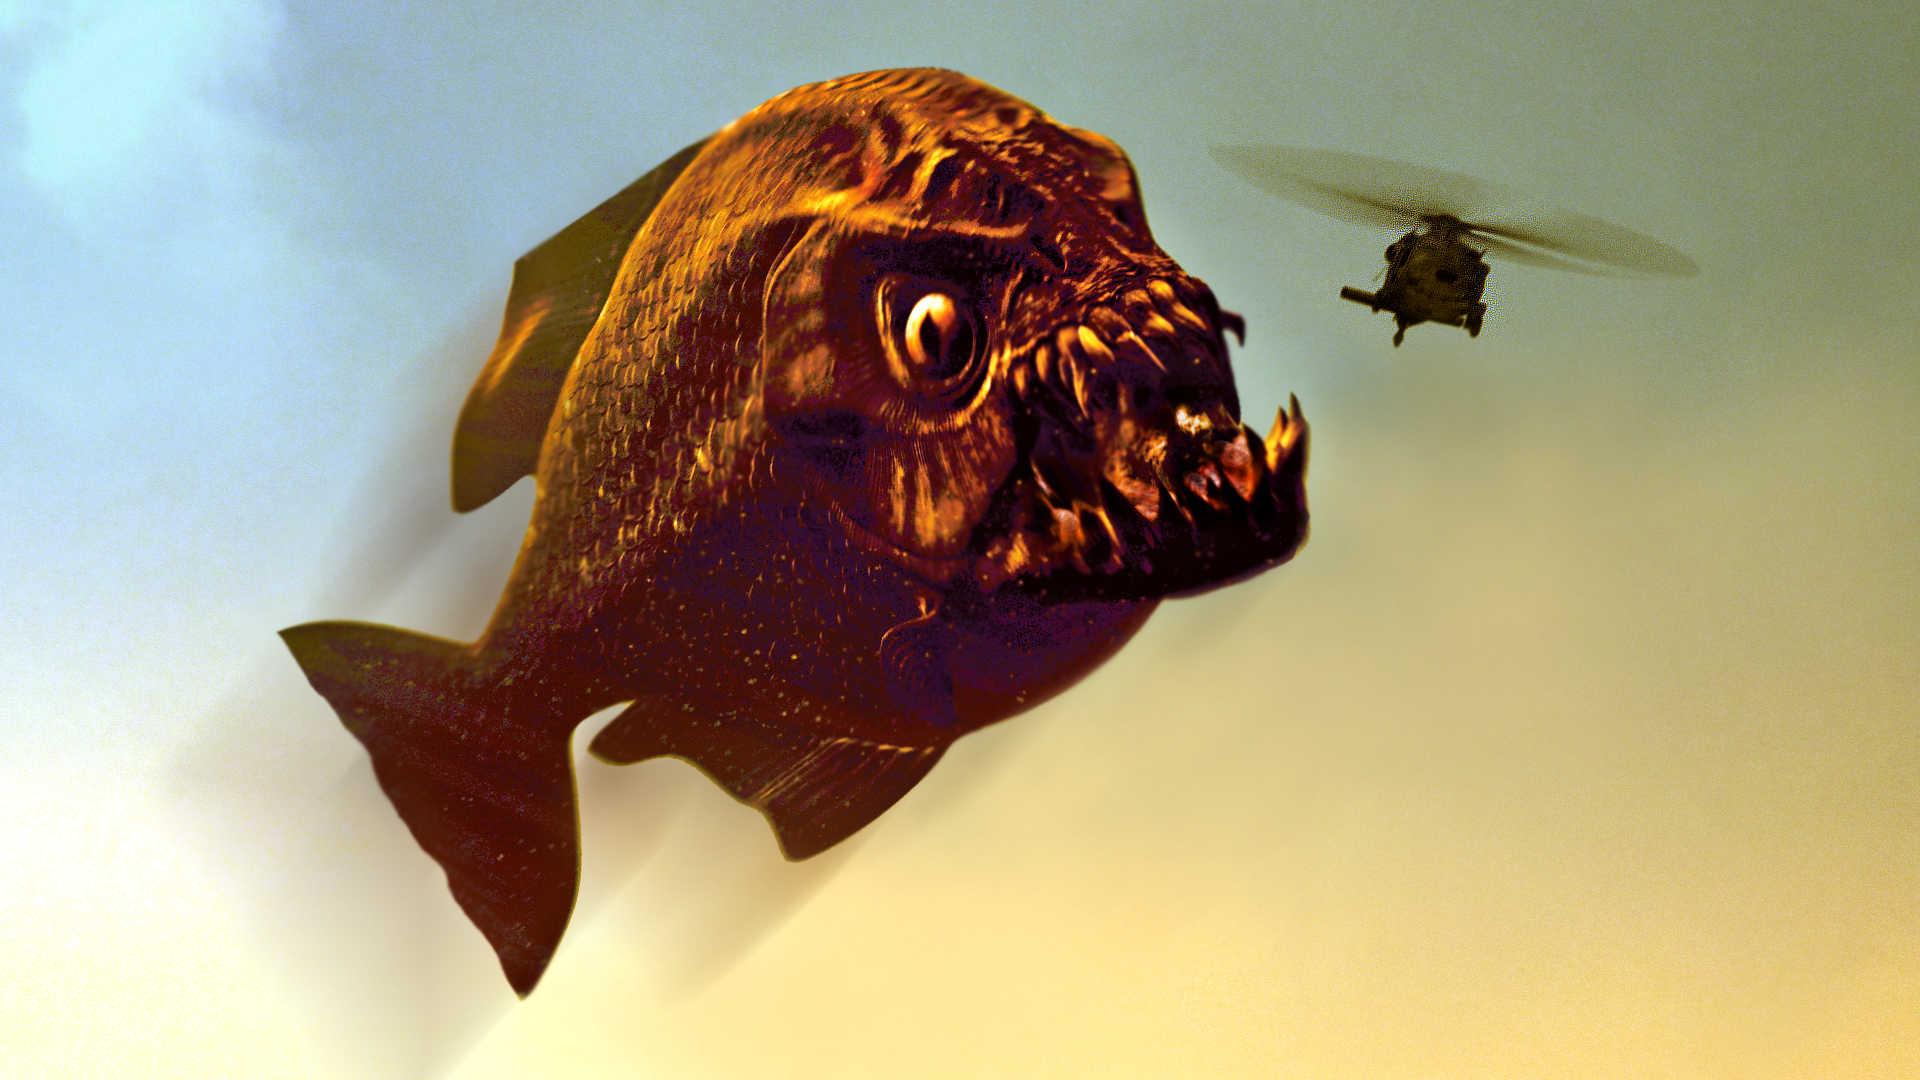 Piranha-eating-helicopter